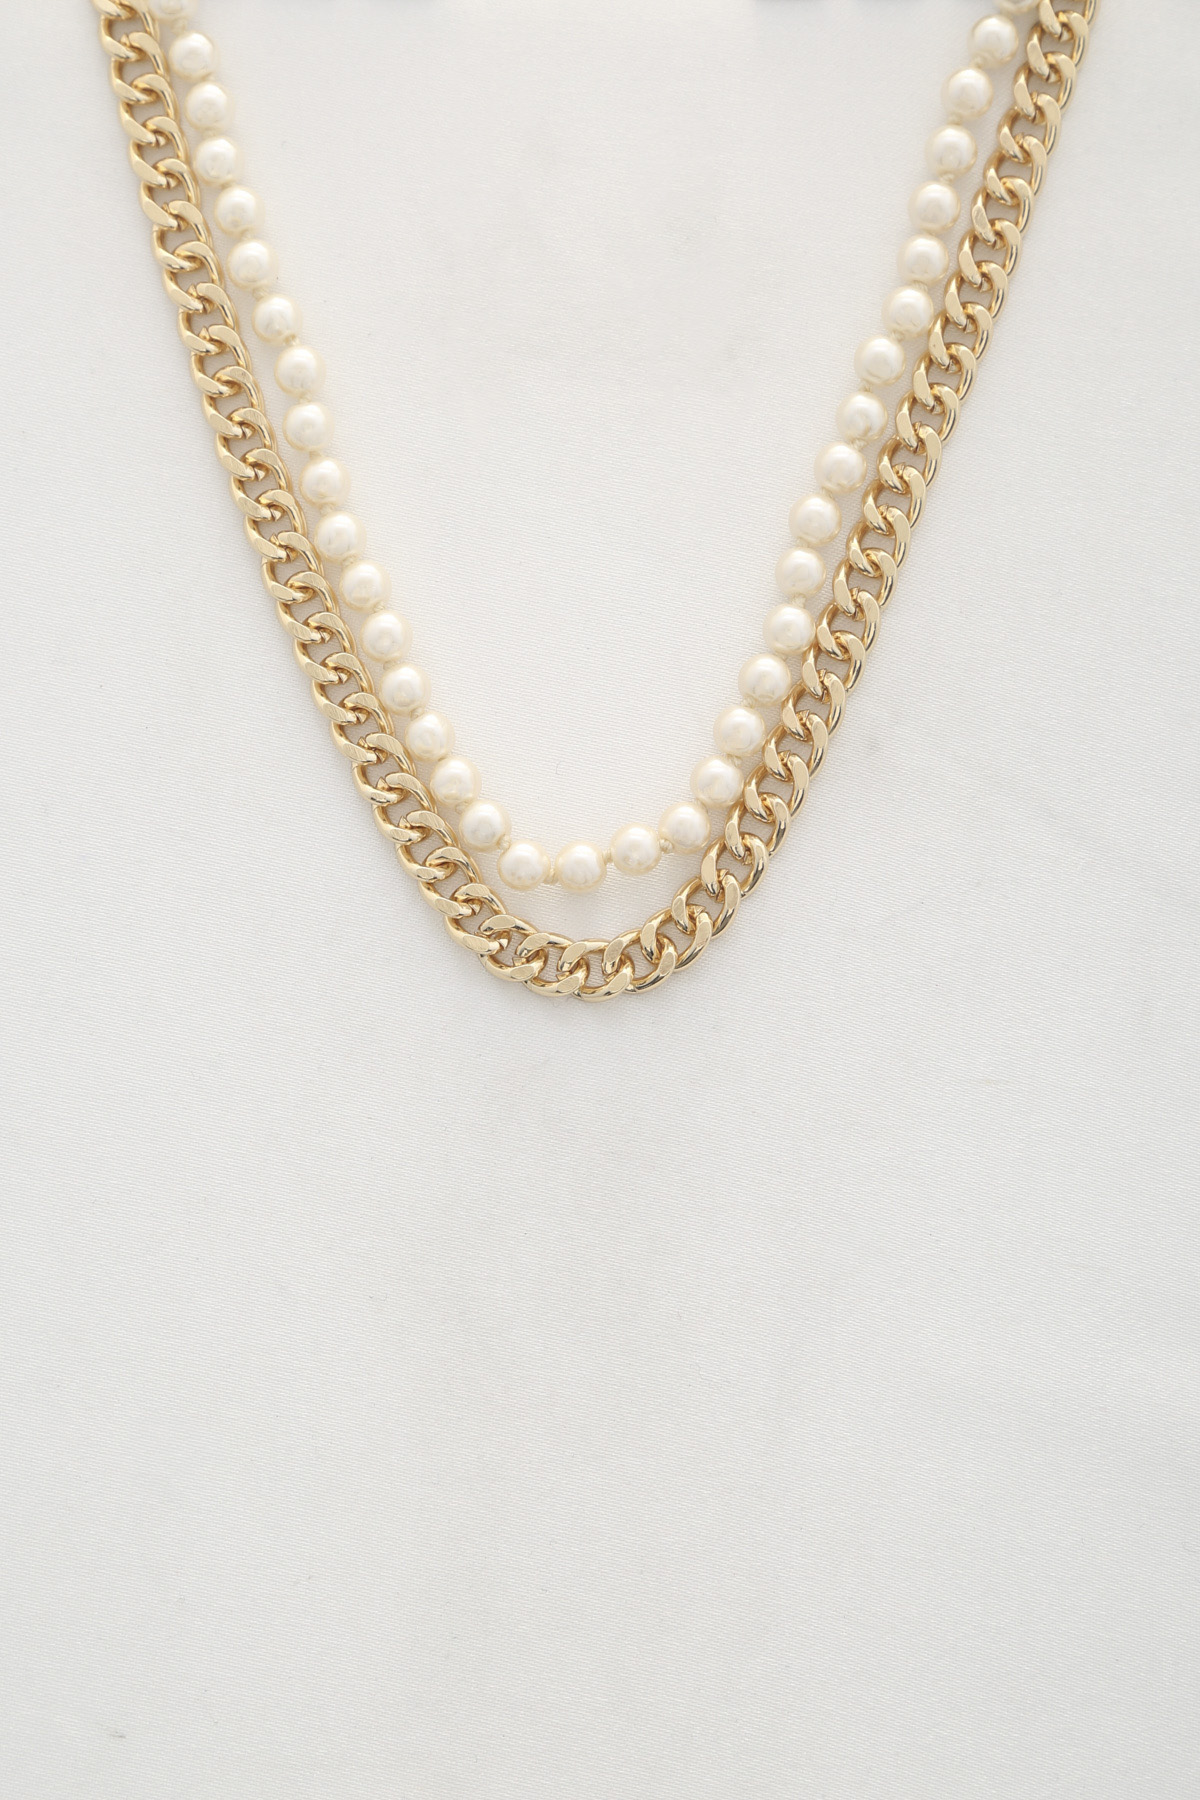 SODAJO PEARL BEAD CURB LINK LAYERED NECKLACE